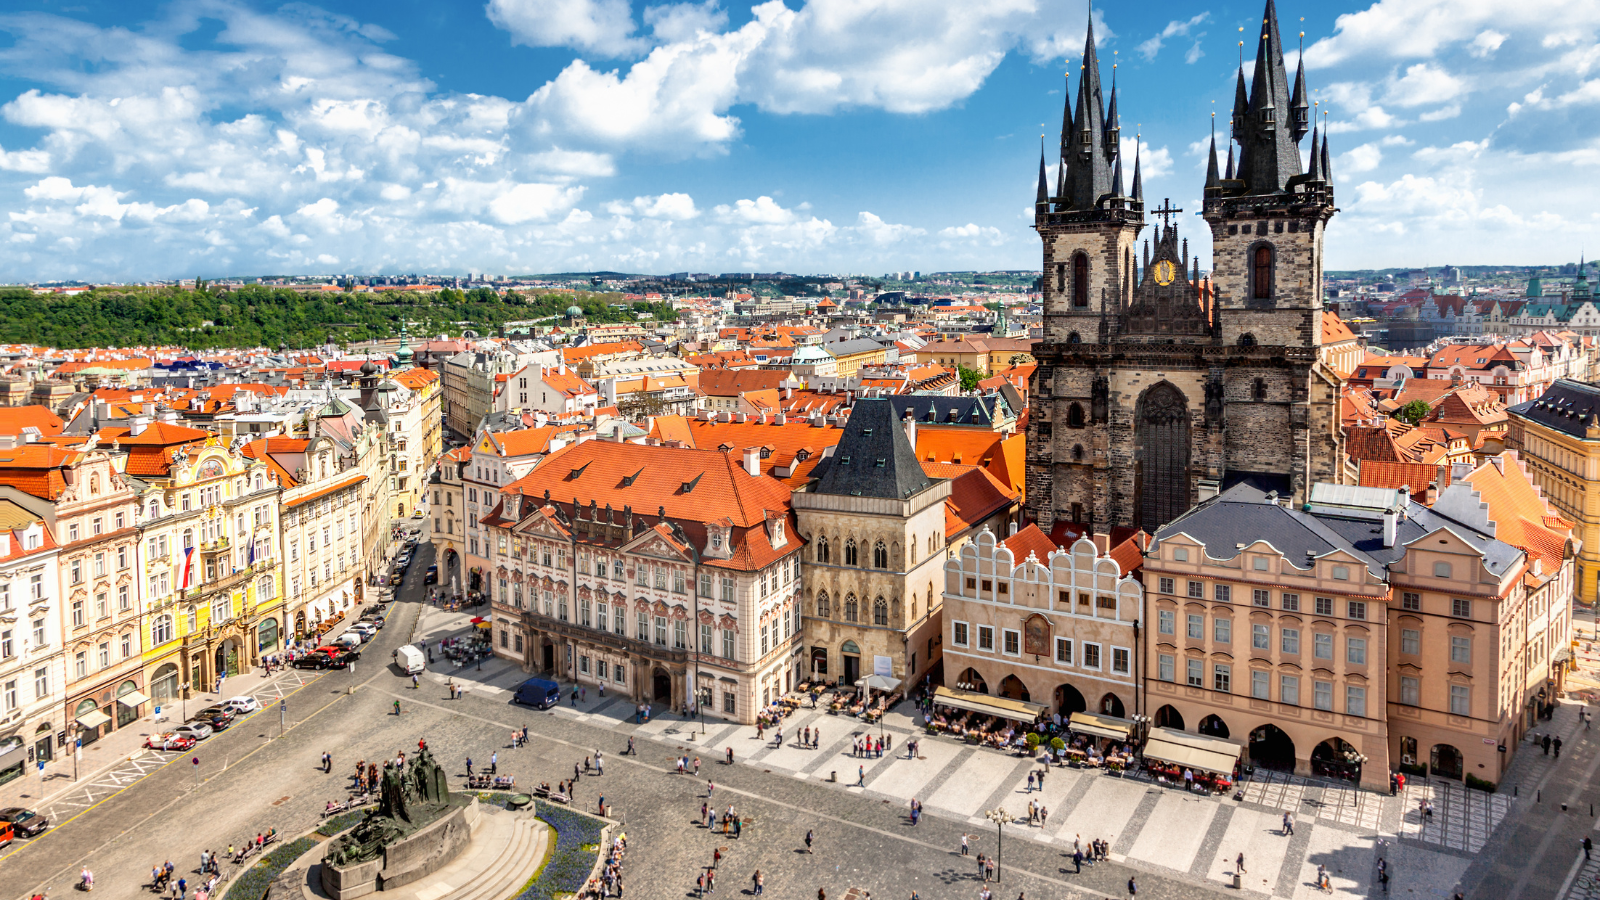 Exploring Prague's old town square - first thing in the list of 10 best things to do in the Czech Republic